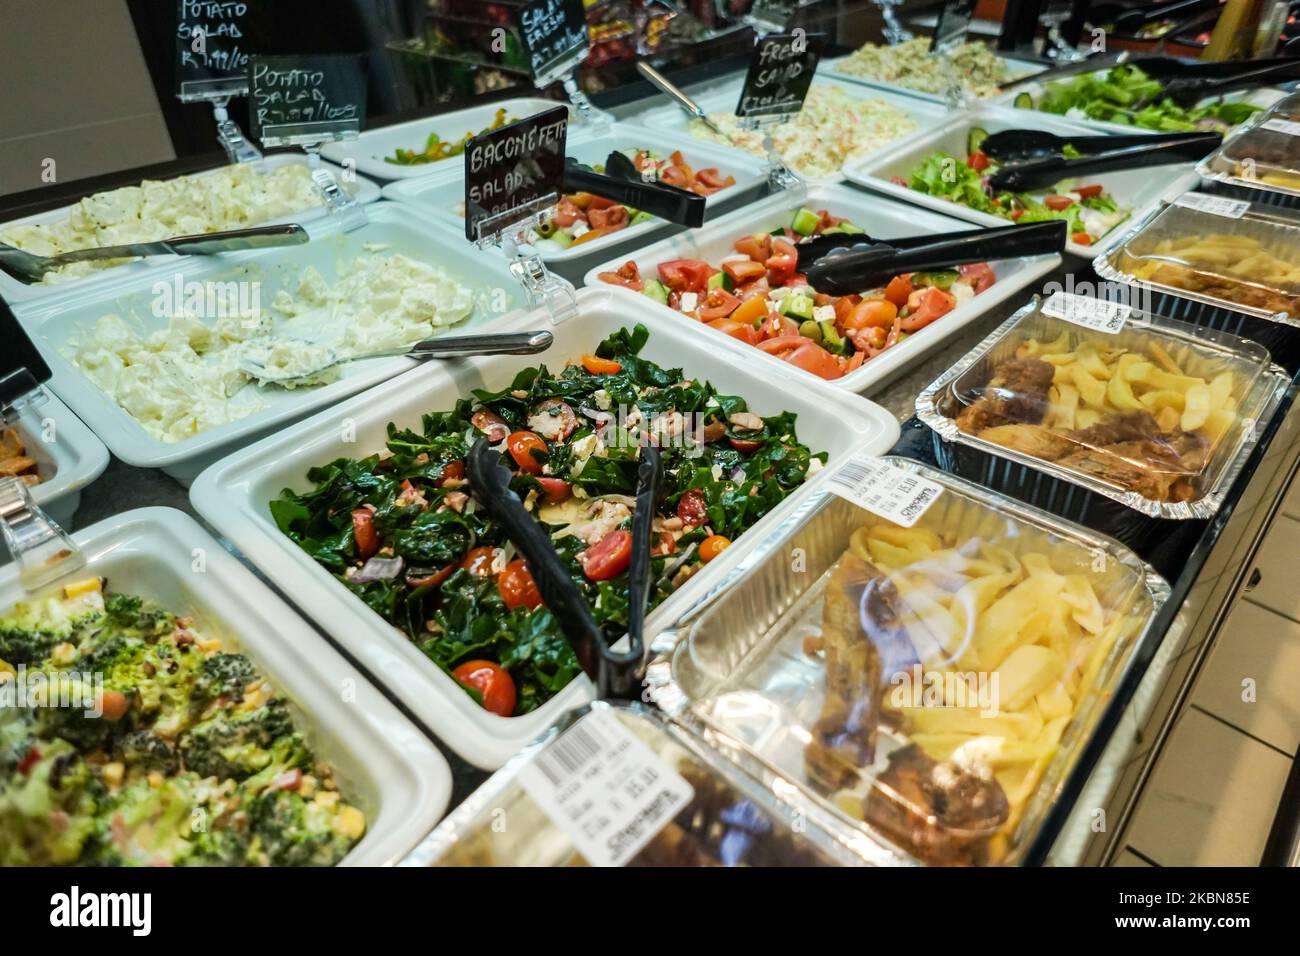 selection, variety, various self service salads at a salad bar in a deli or supermarket on display in South Africa Stock Photo